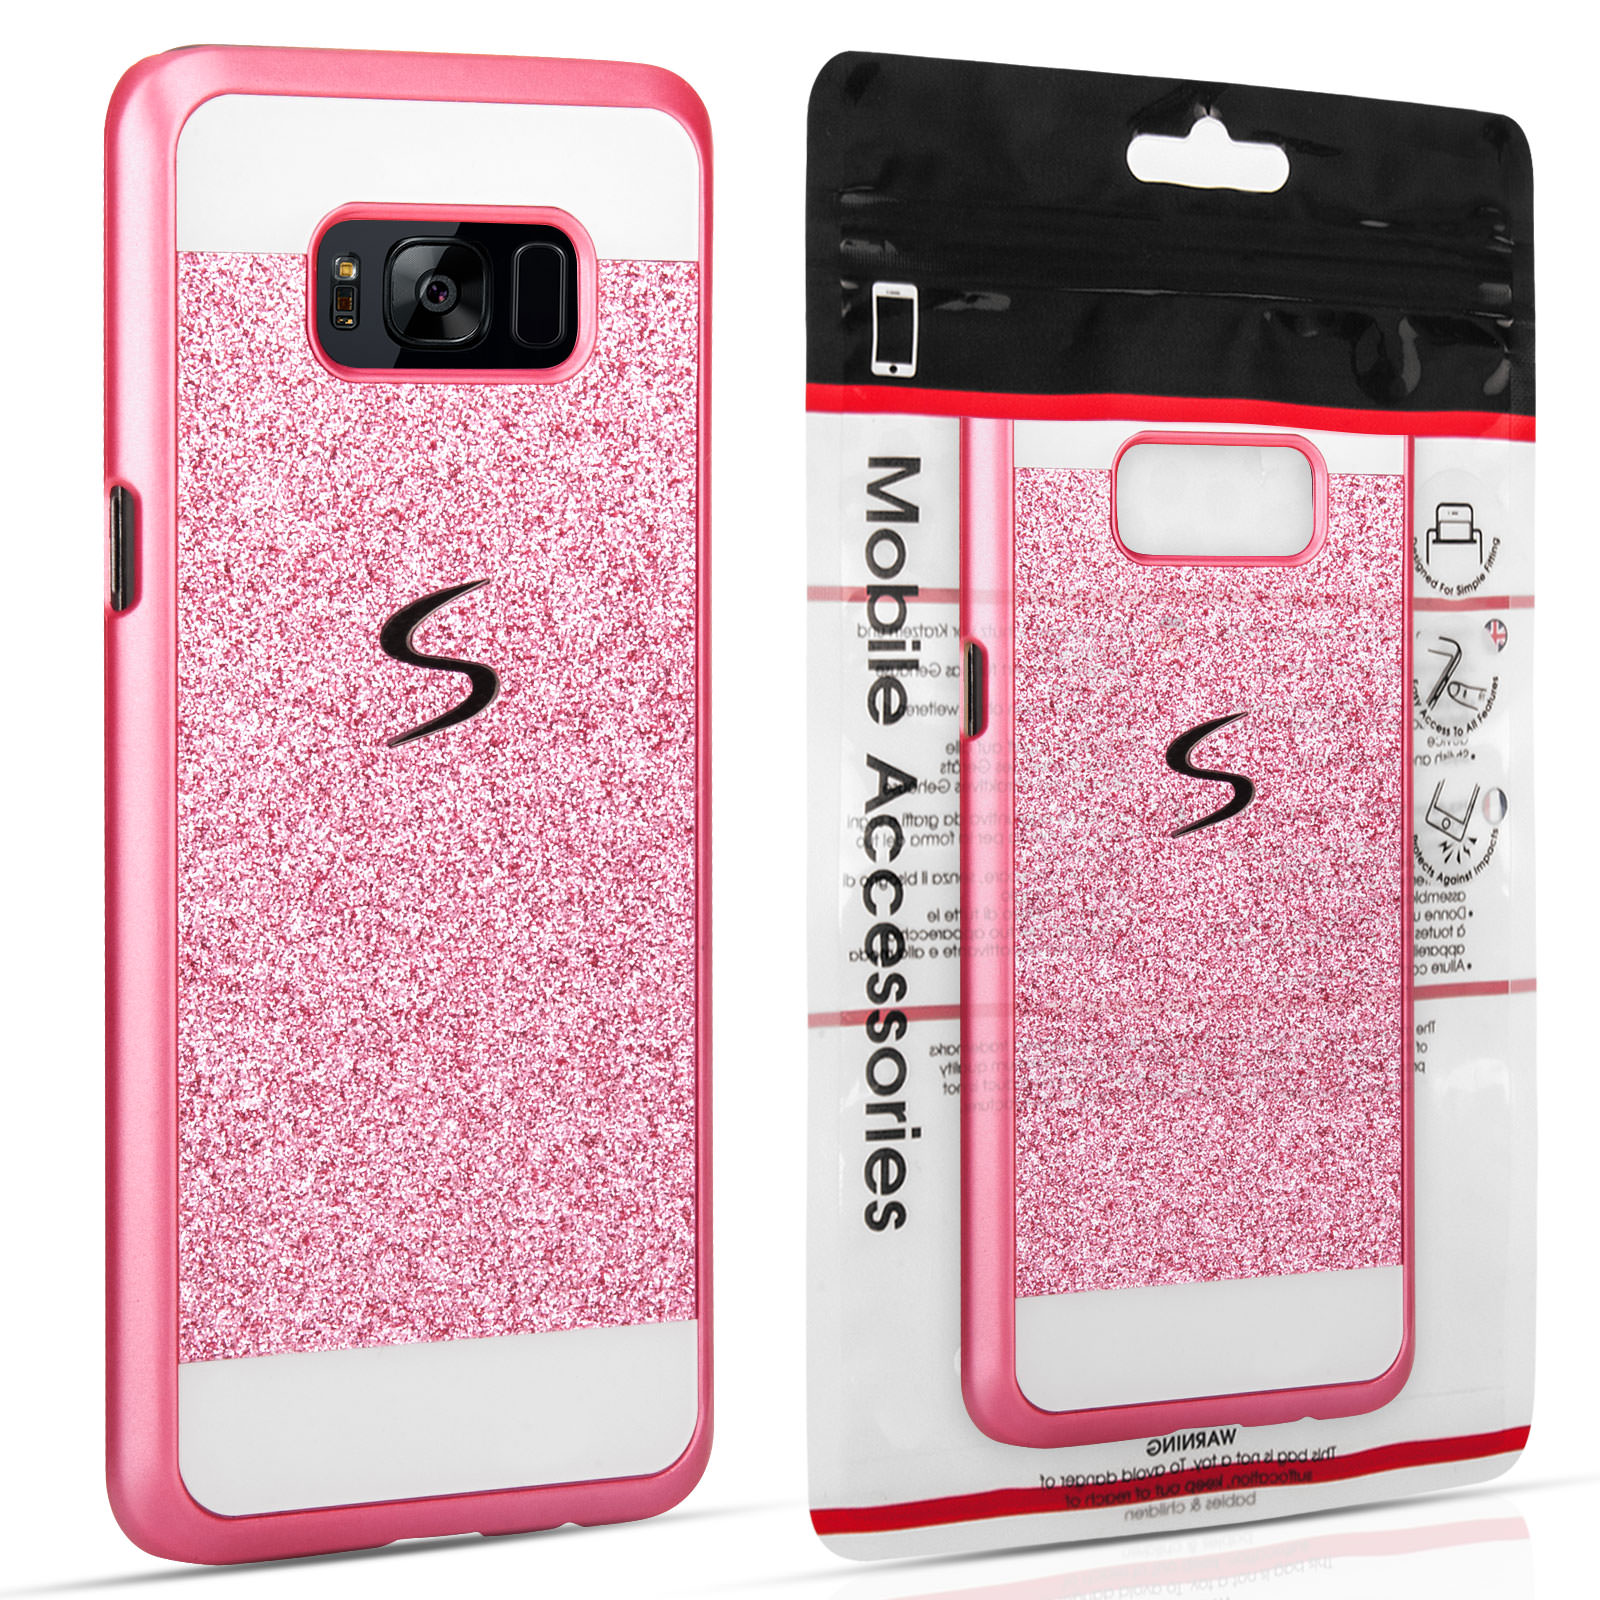 Samsung Galaxy S8 Plus Flash Diamond Case - Pink At Mobile Madhouse